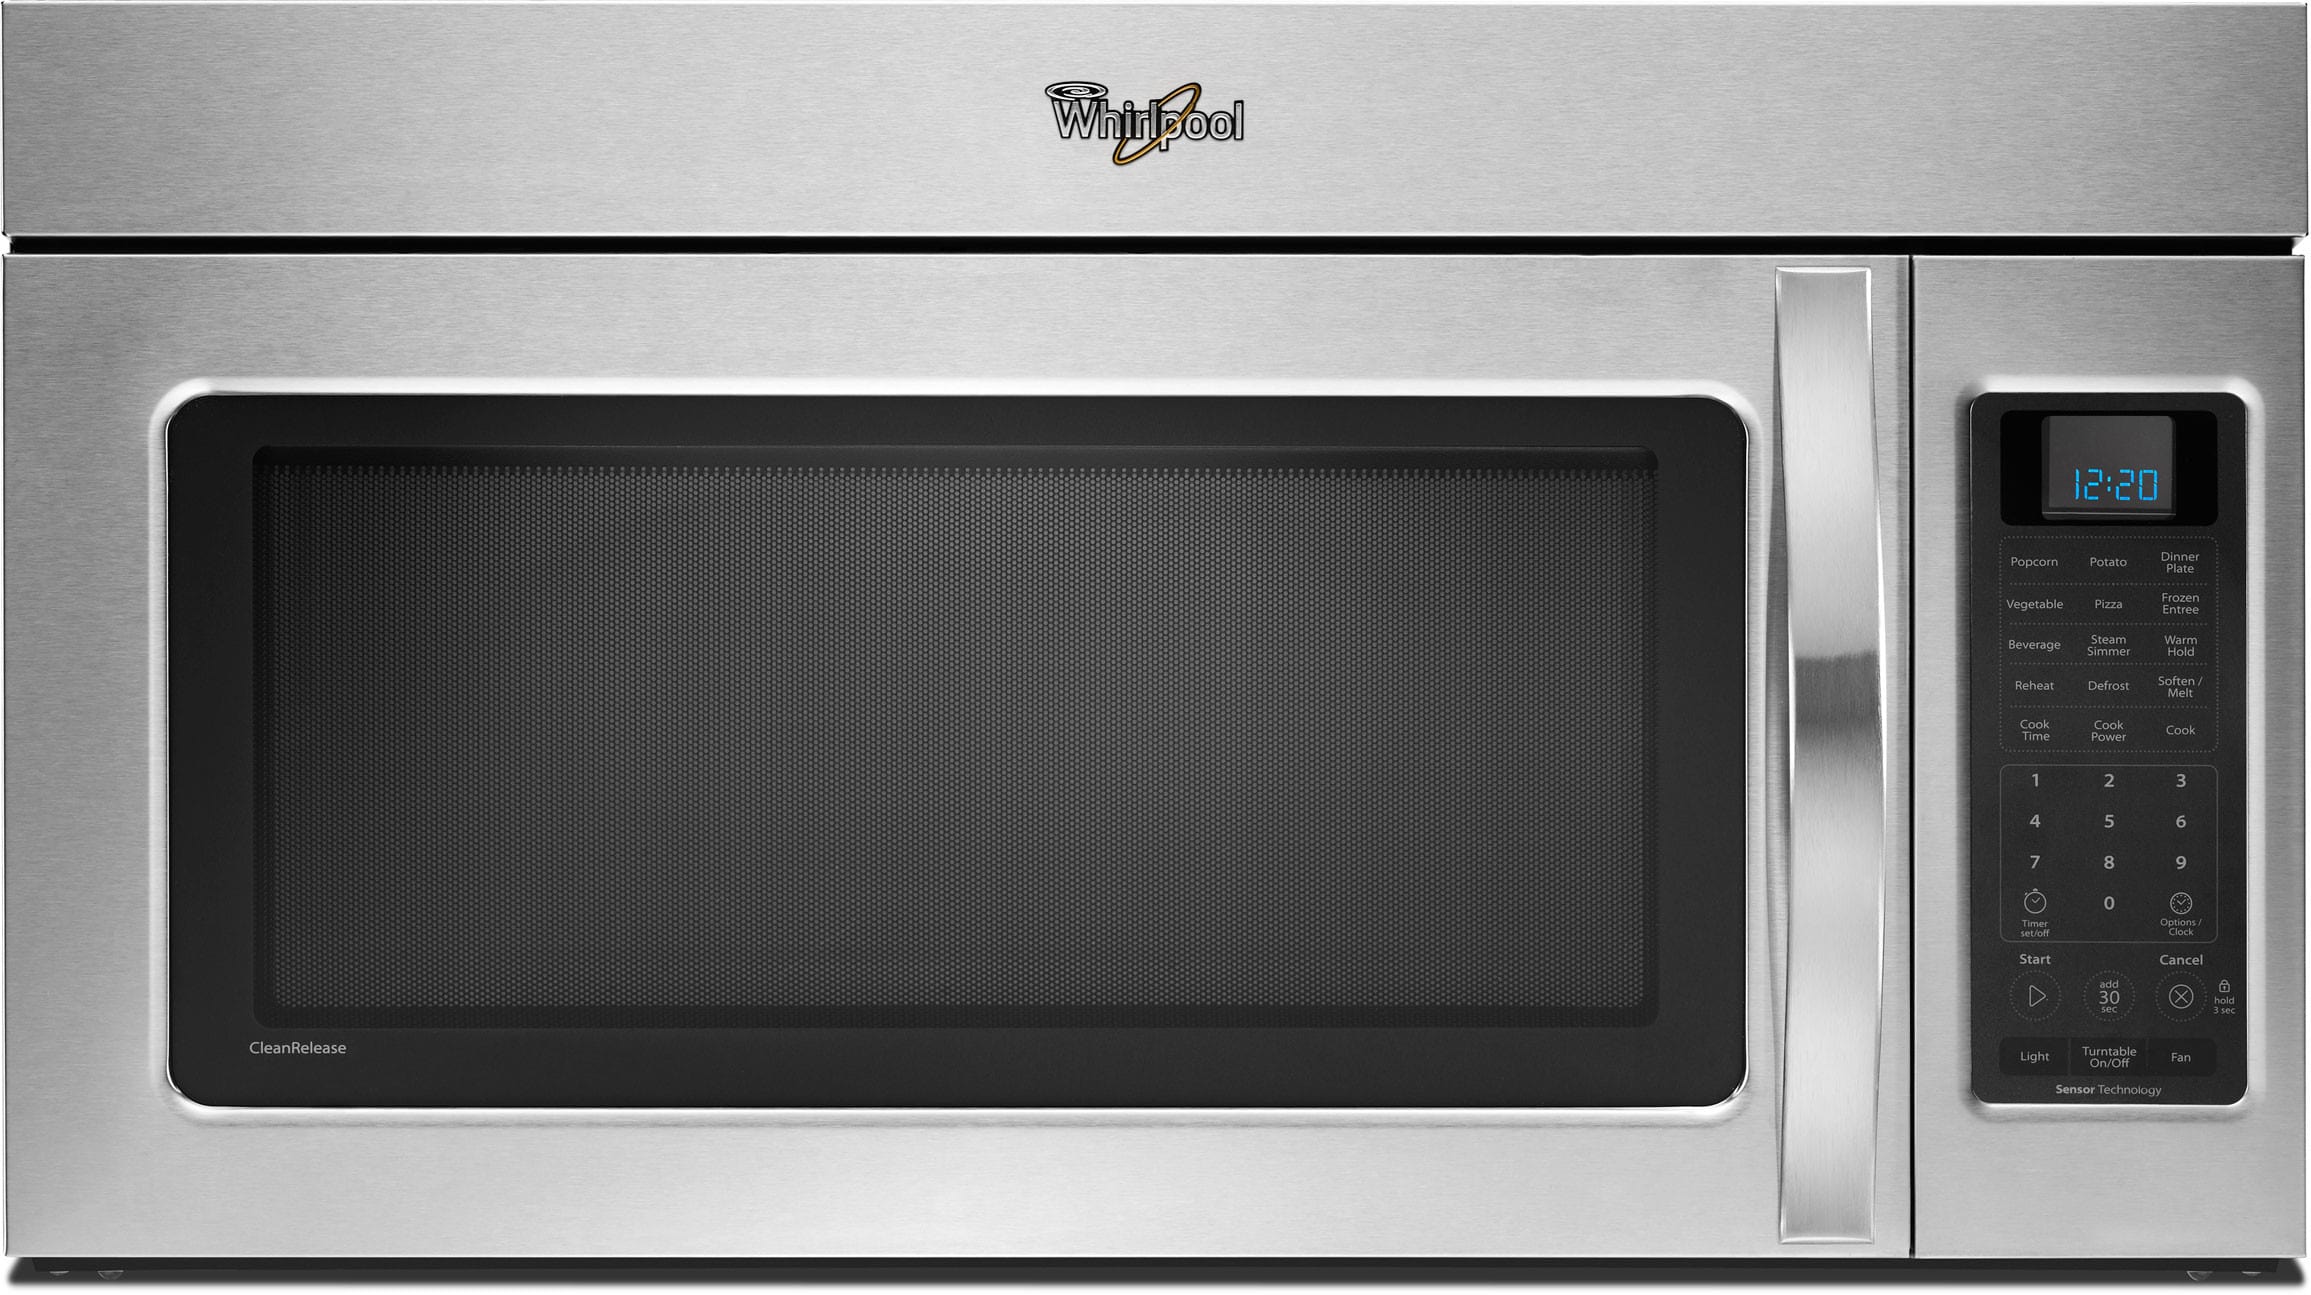 Whirlpool WMH53520AW 2.0 cu. ft. Over-the-Range Microwave Oven with 400